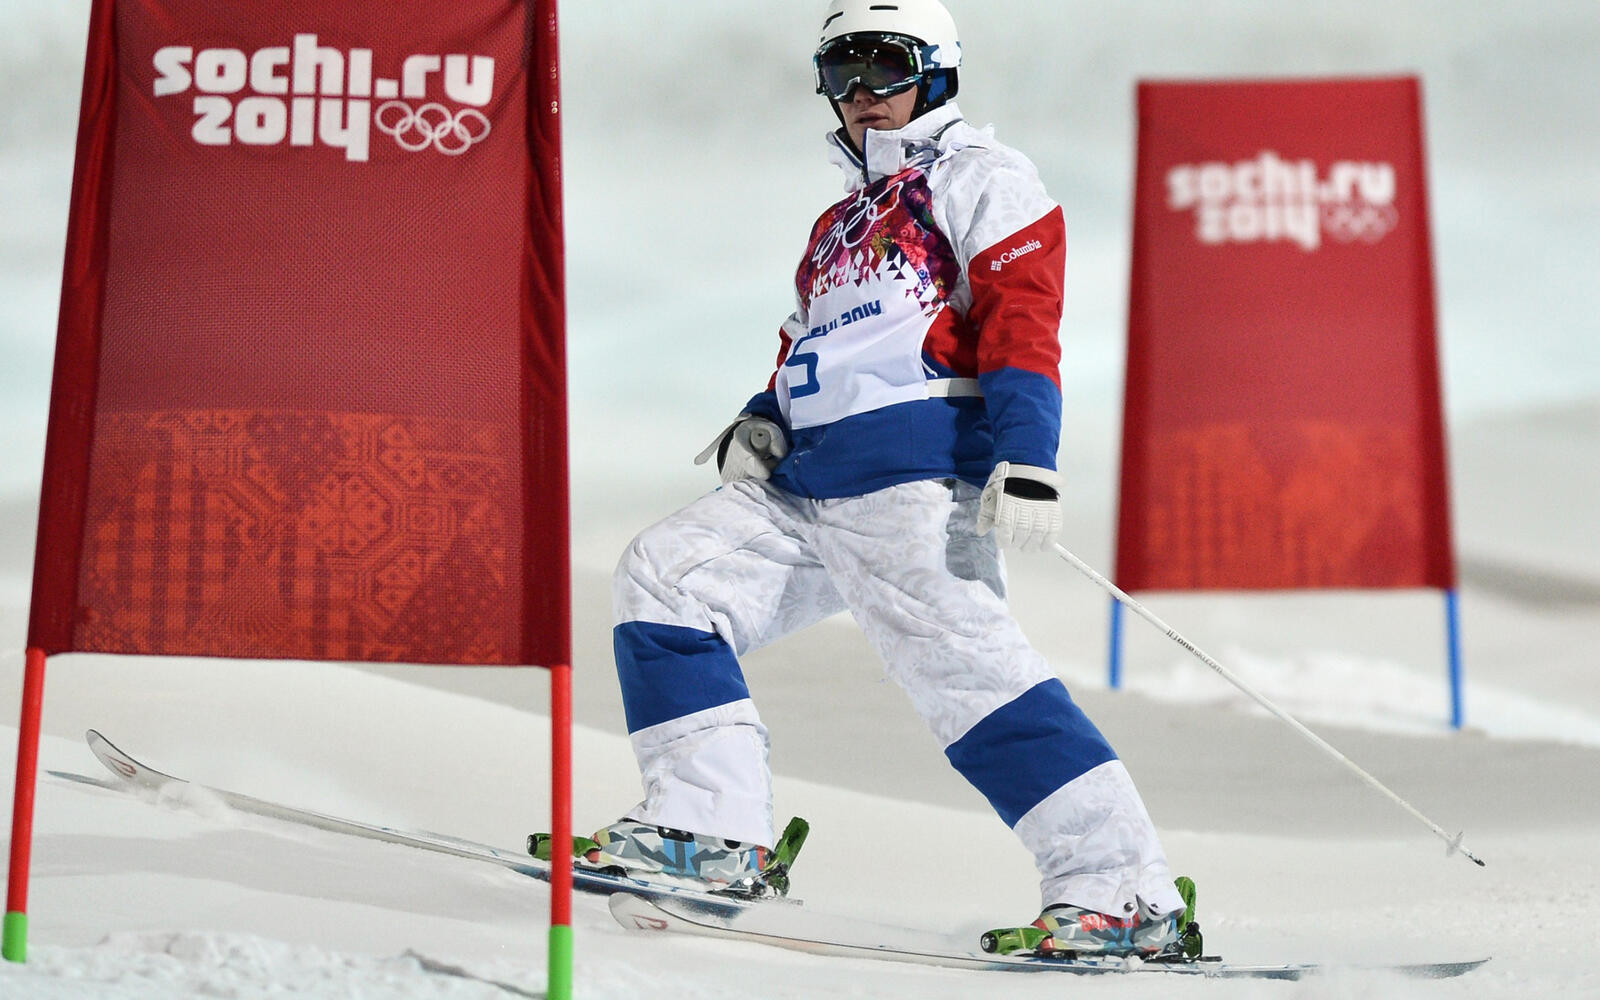 Wallpapers olympic games Sochi skier on the desktop